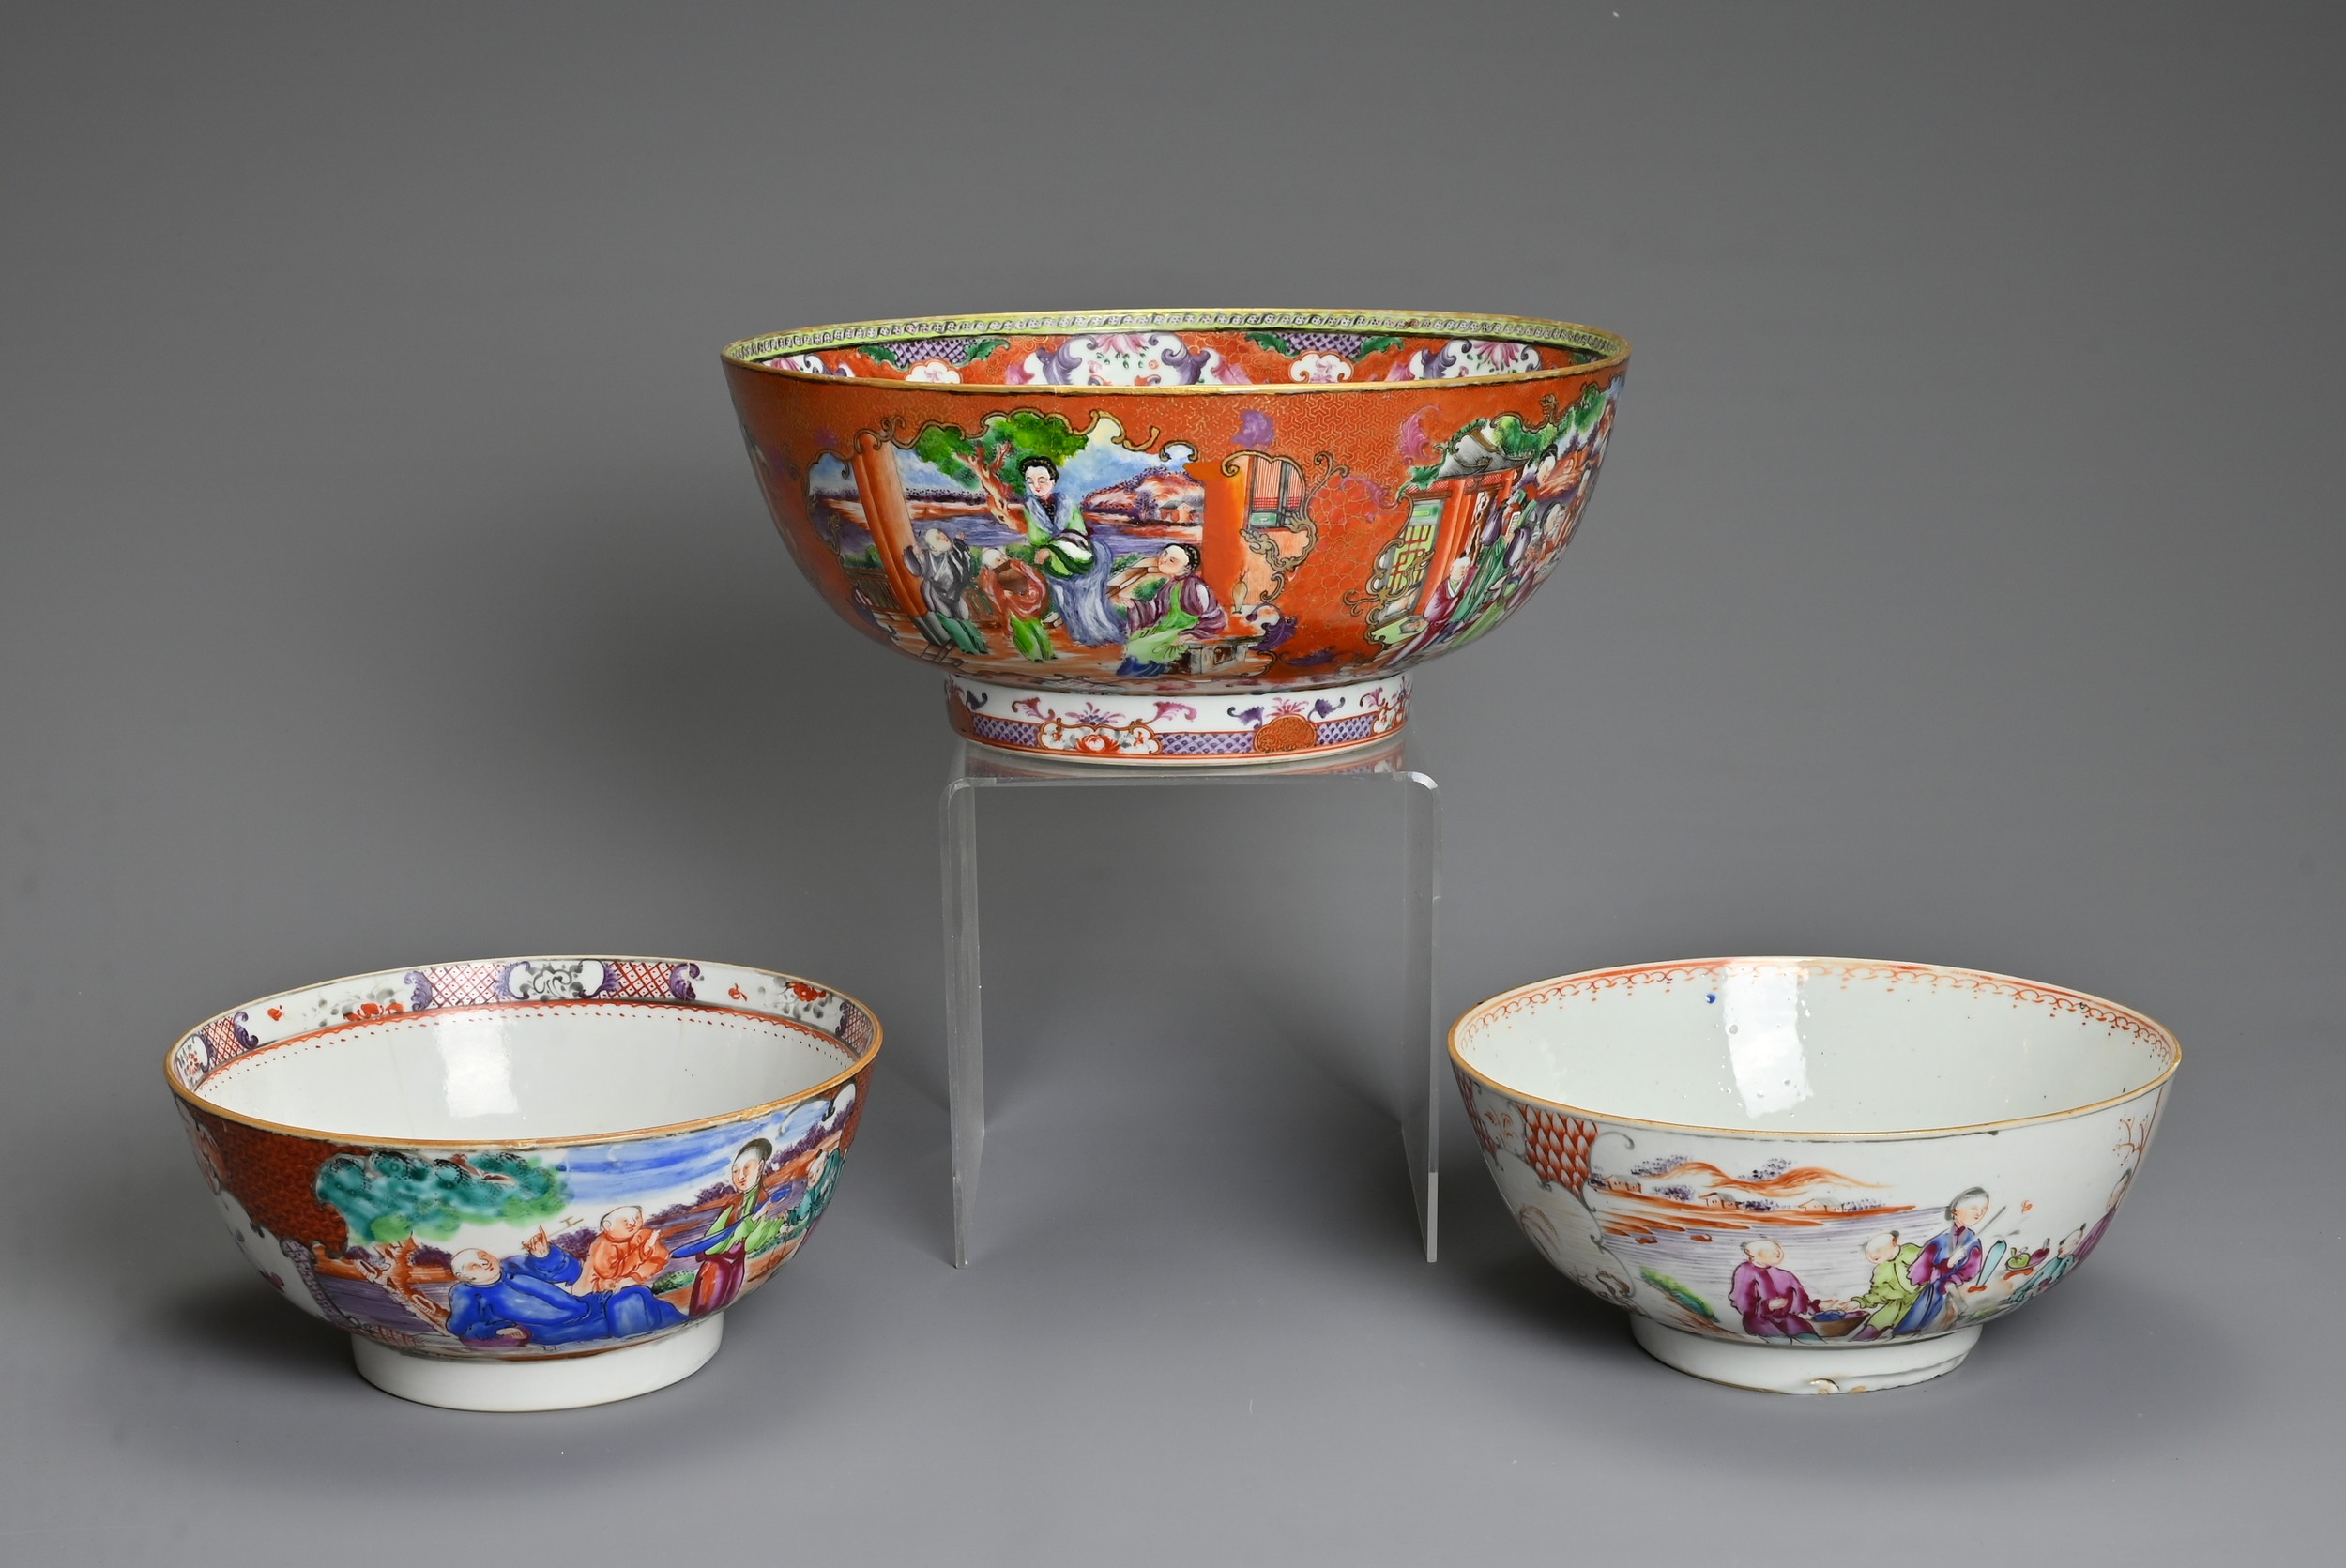 THREE CHINESE FAMILLE ROSE PORCELAIN BOWLS, 18TH CENTURY. Of graduating sizes decorated with various - Image 6 of 6